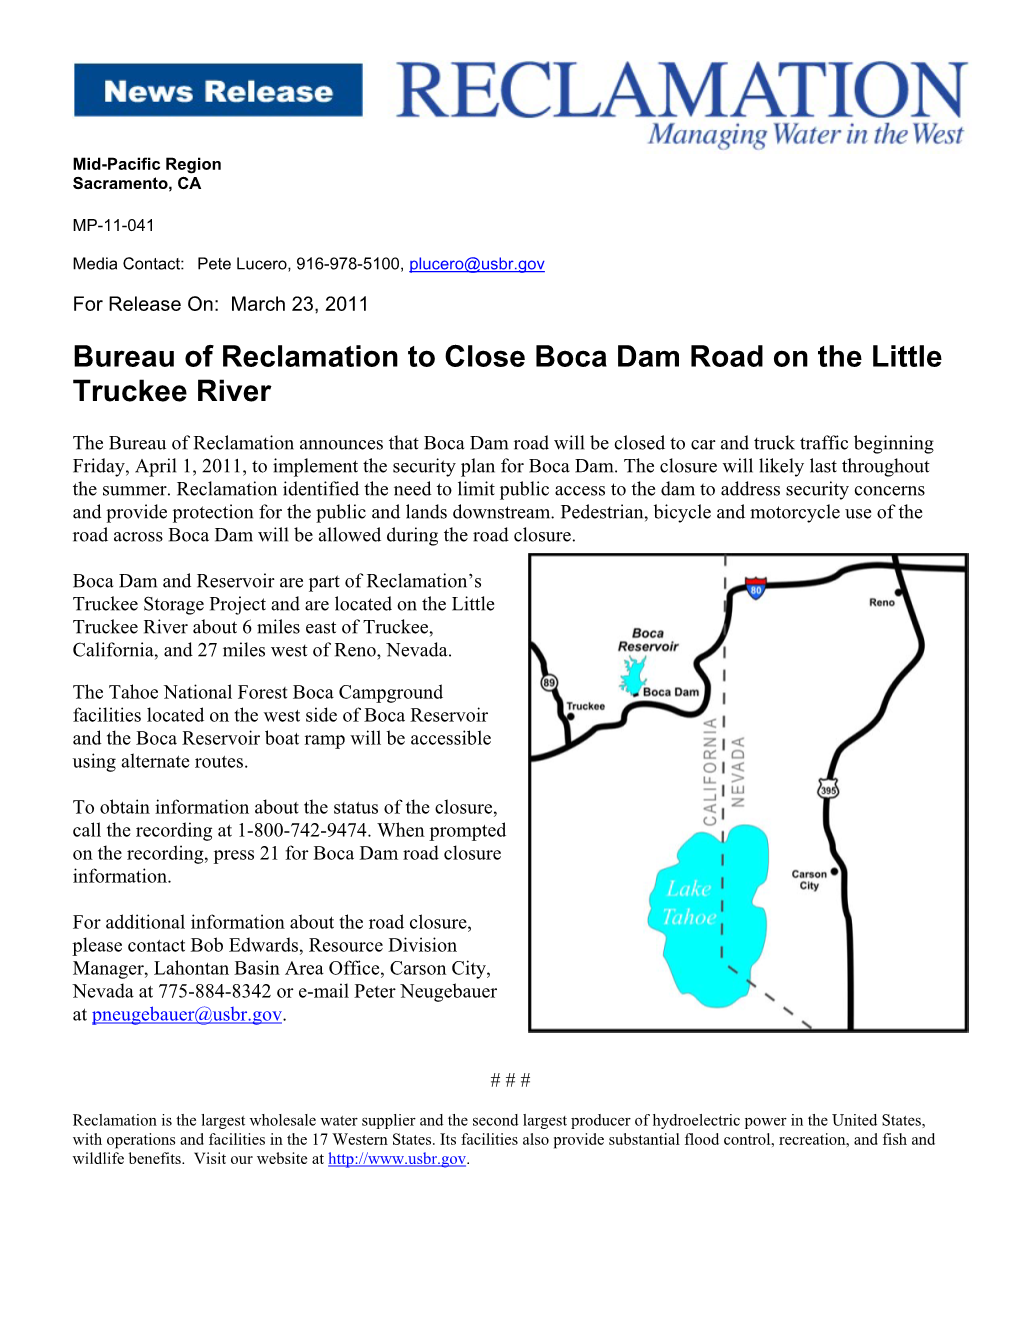 Bureau of Reclamation to Close Boca Dam Road on the Little Truckee River